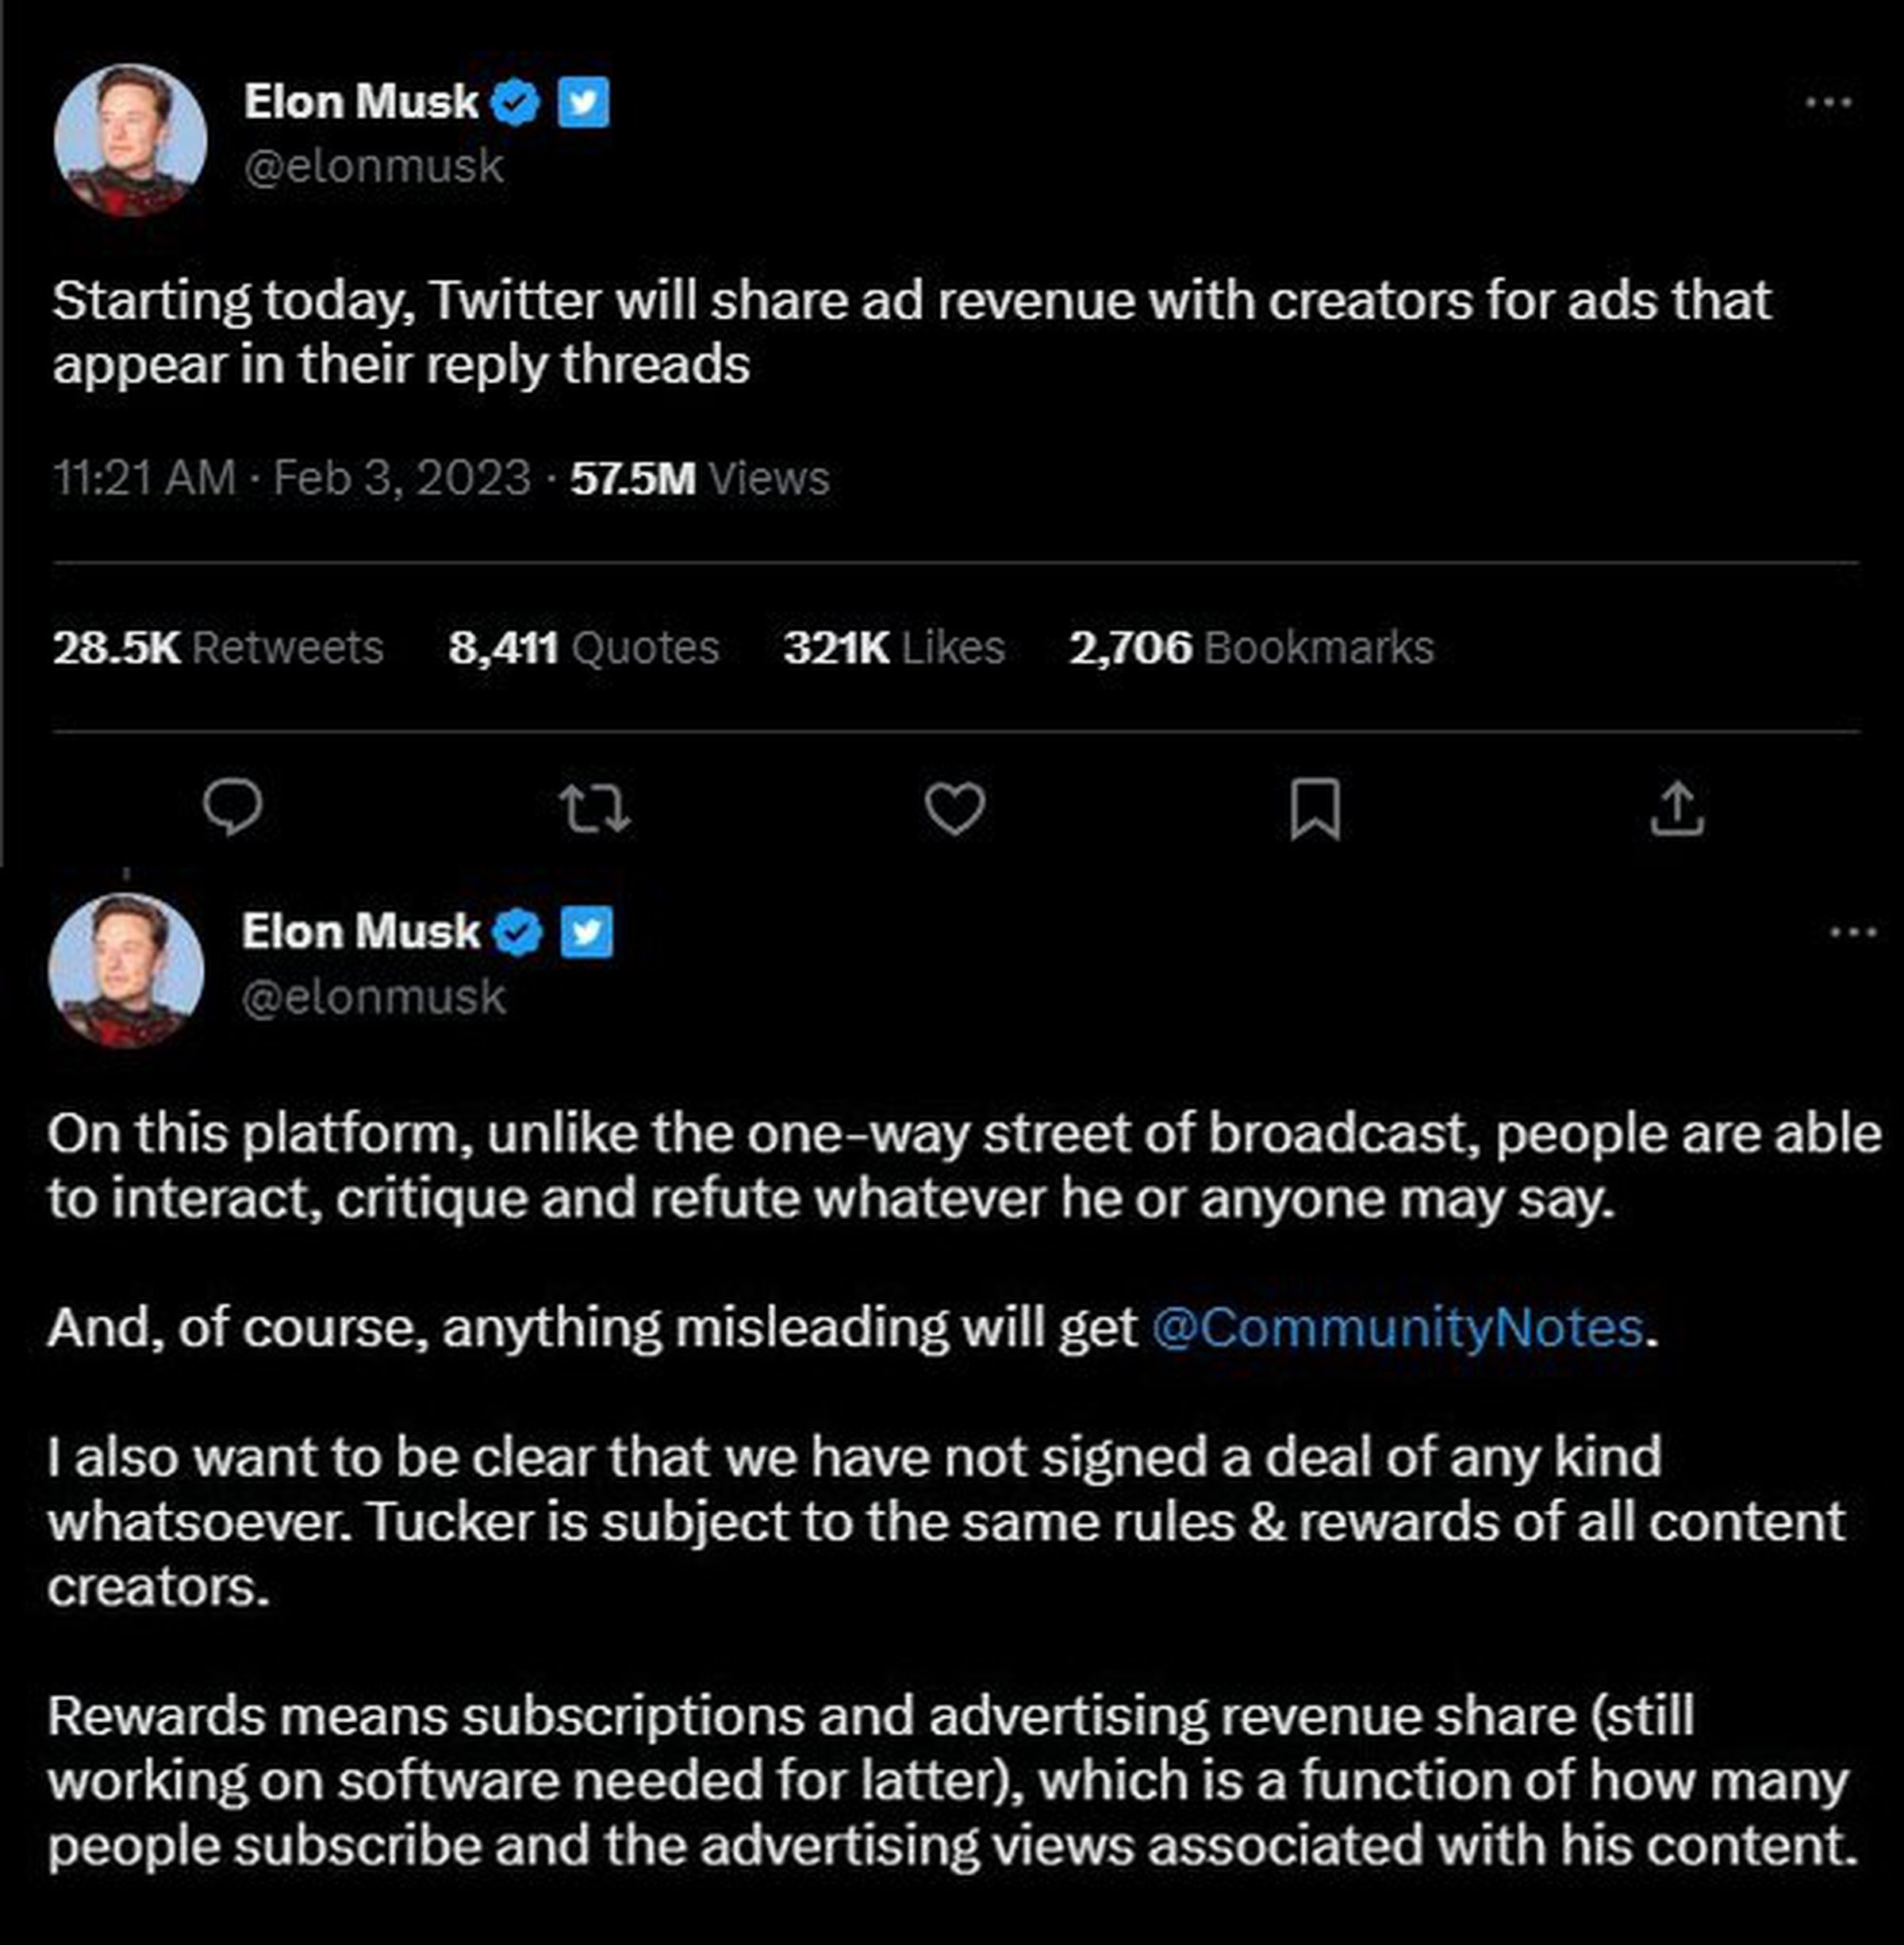 Elon Musk on Twitter, “I also want to be clear that we have not signed a deal of any kind whatsoever. Tucker is subject to the same rules &amp; rewards of all content creators. Rewards means subscriptions and advertising revenue share (still working on software needed for latter), which is a function of how many people subscribe and the advertising views associated with his content.”